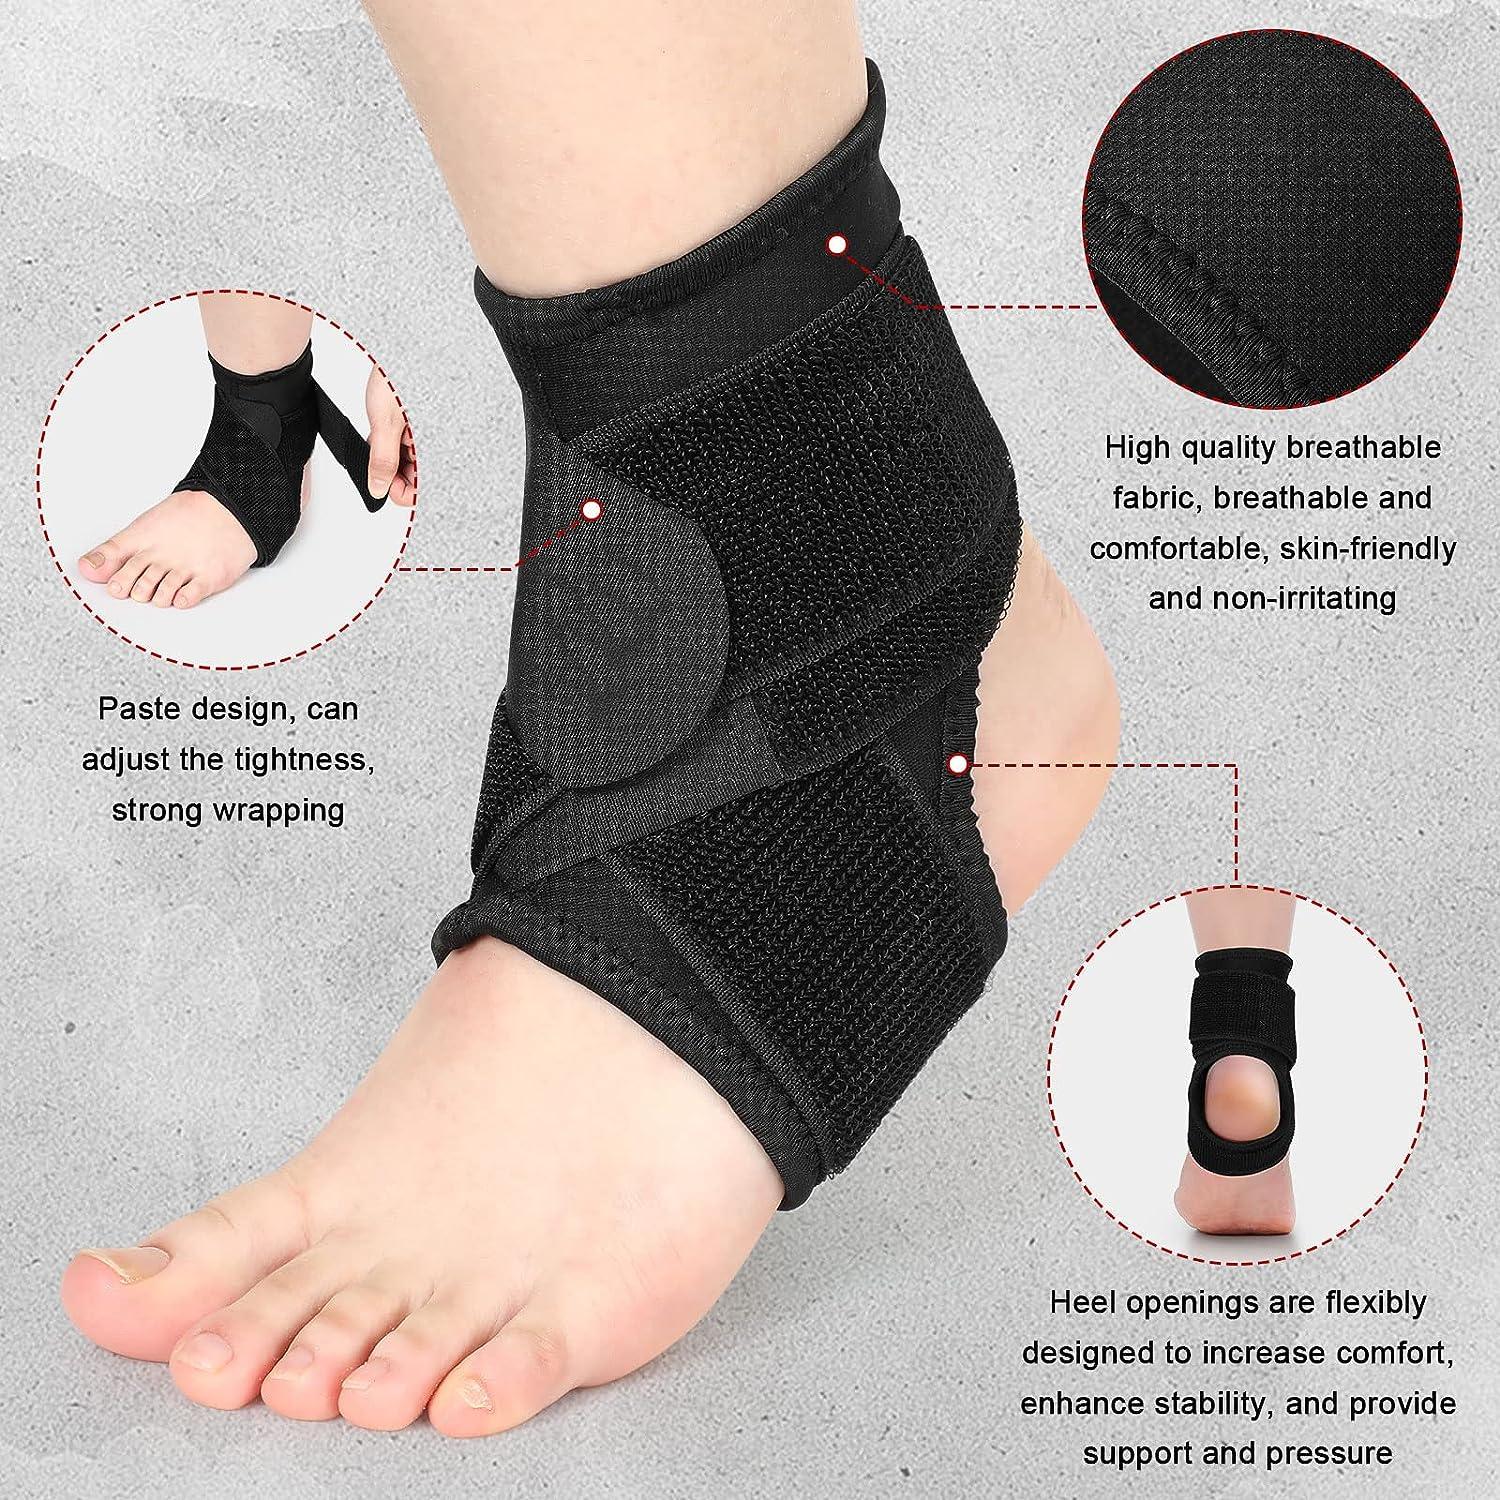 2 Ankle Support Brace Sleeve Elastic Compression Wrap Sports Relief Pain  Foot